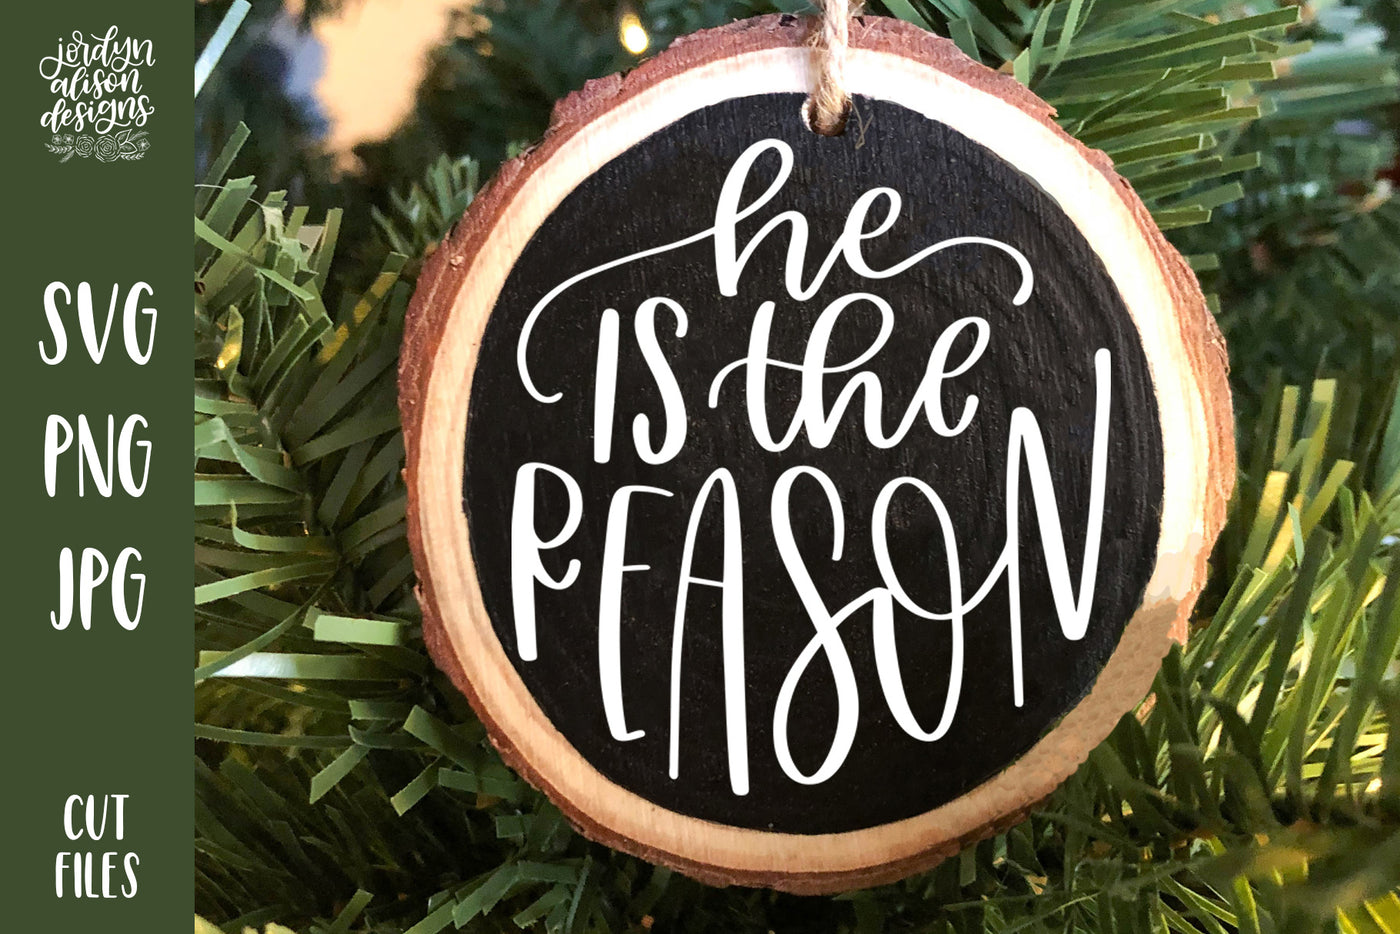 Handwritten text "He is the Reason" on Round Christmas Ornament. 